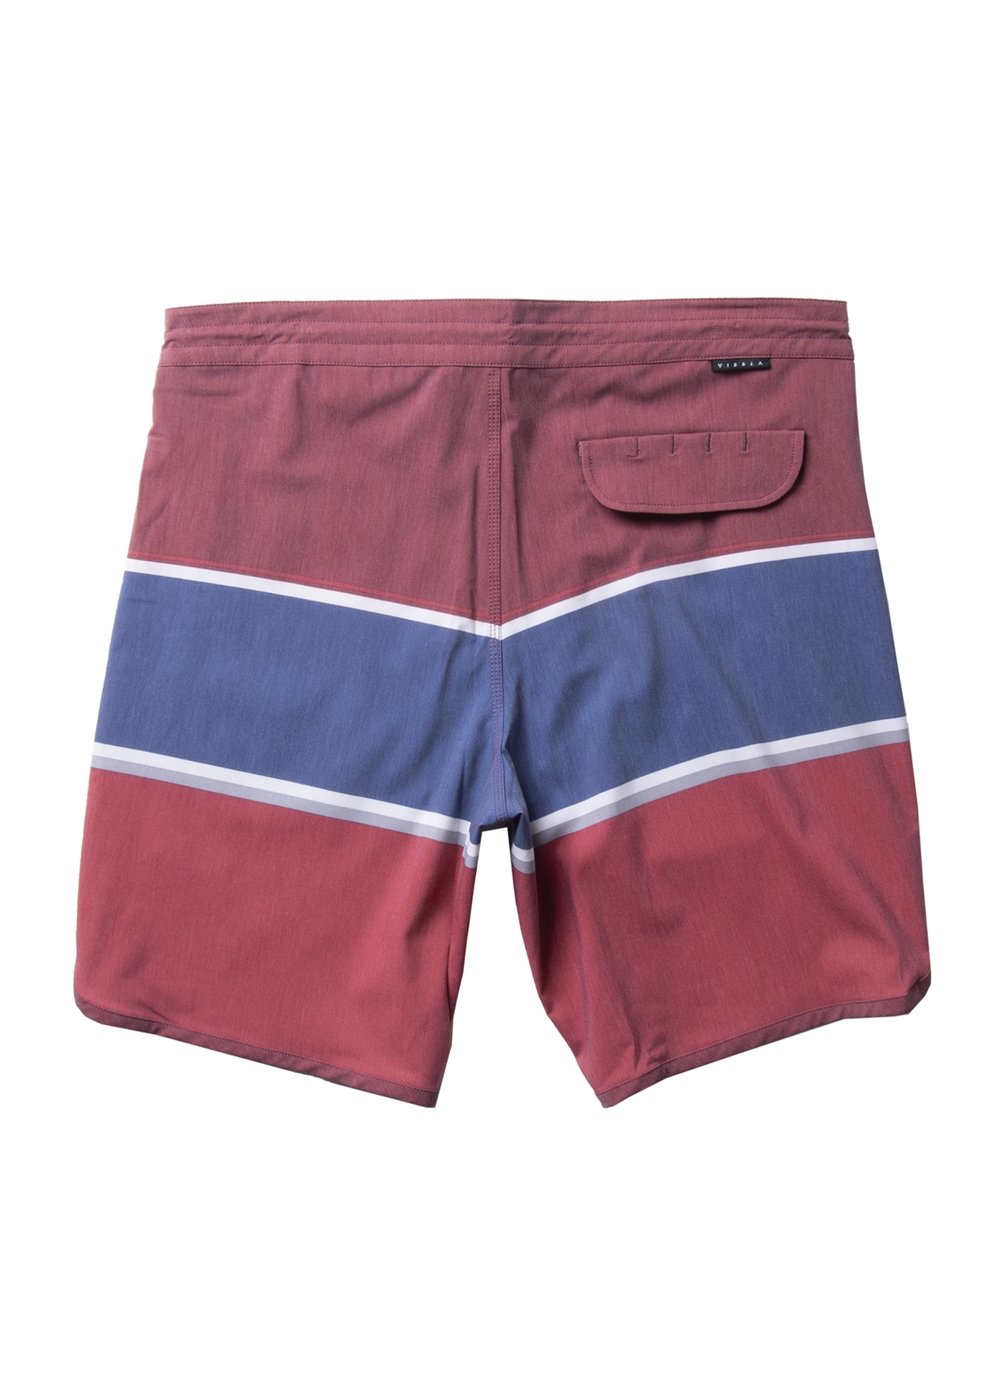 Vissla Blood 17" The Point Boys Boardshort Back View. Multi Color with Patch.